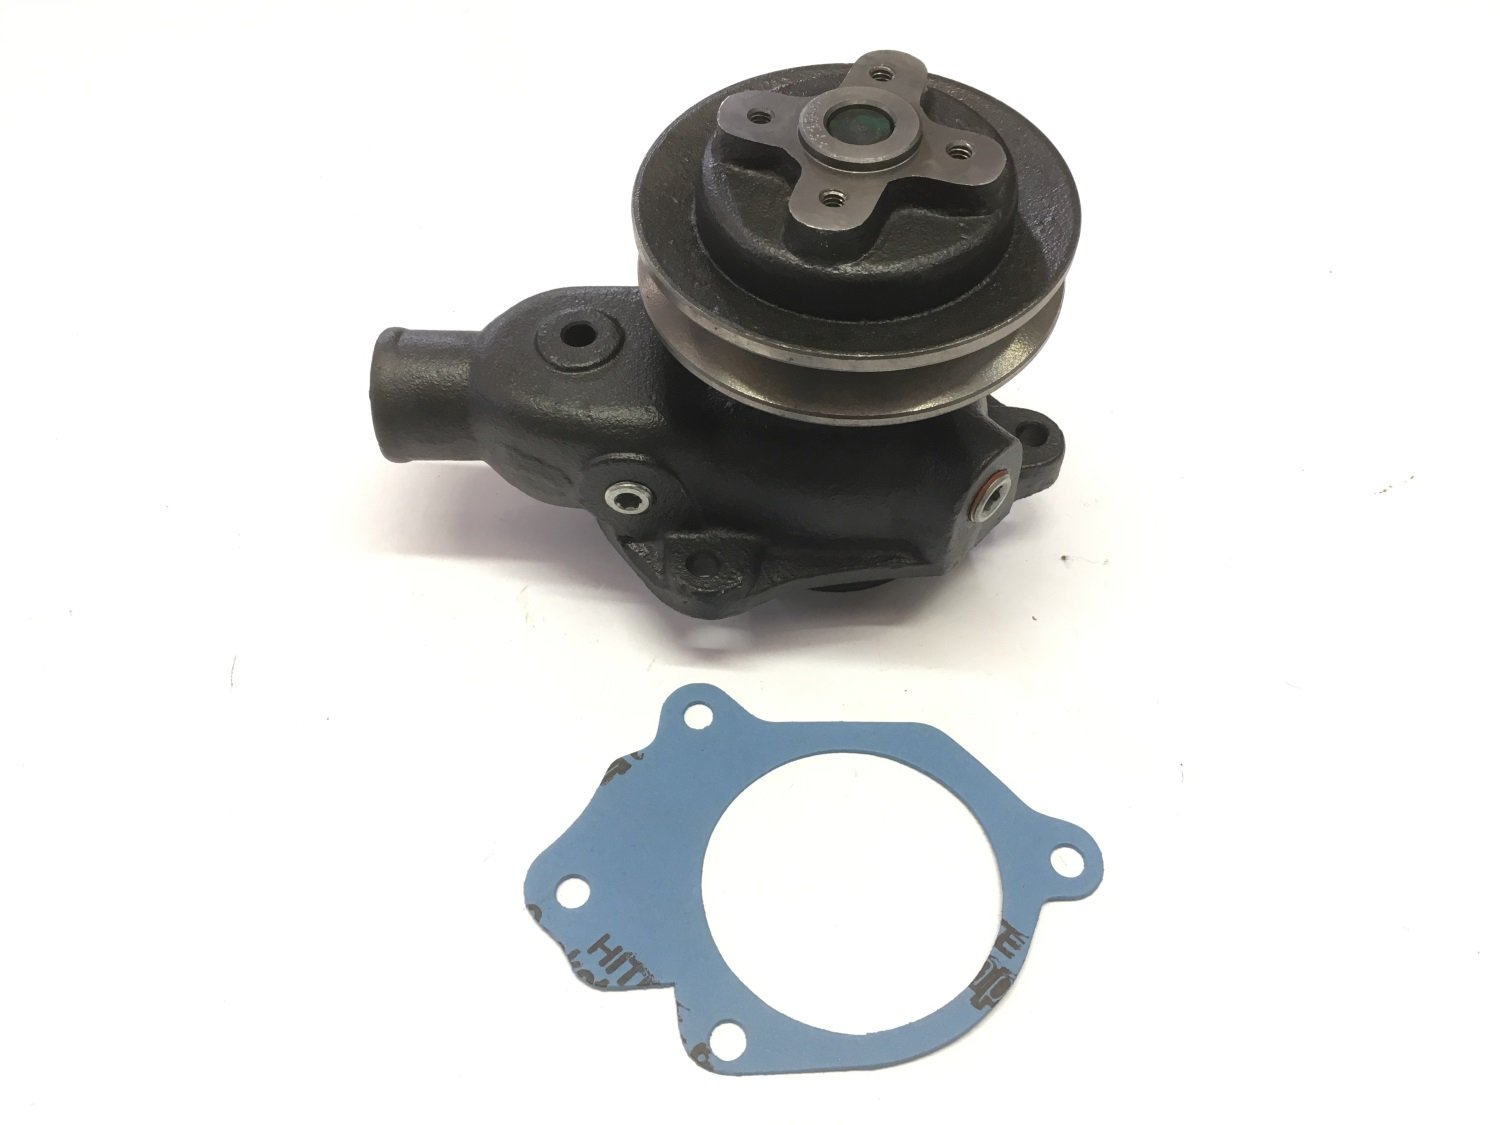 Water pump with plugs for heater connection